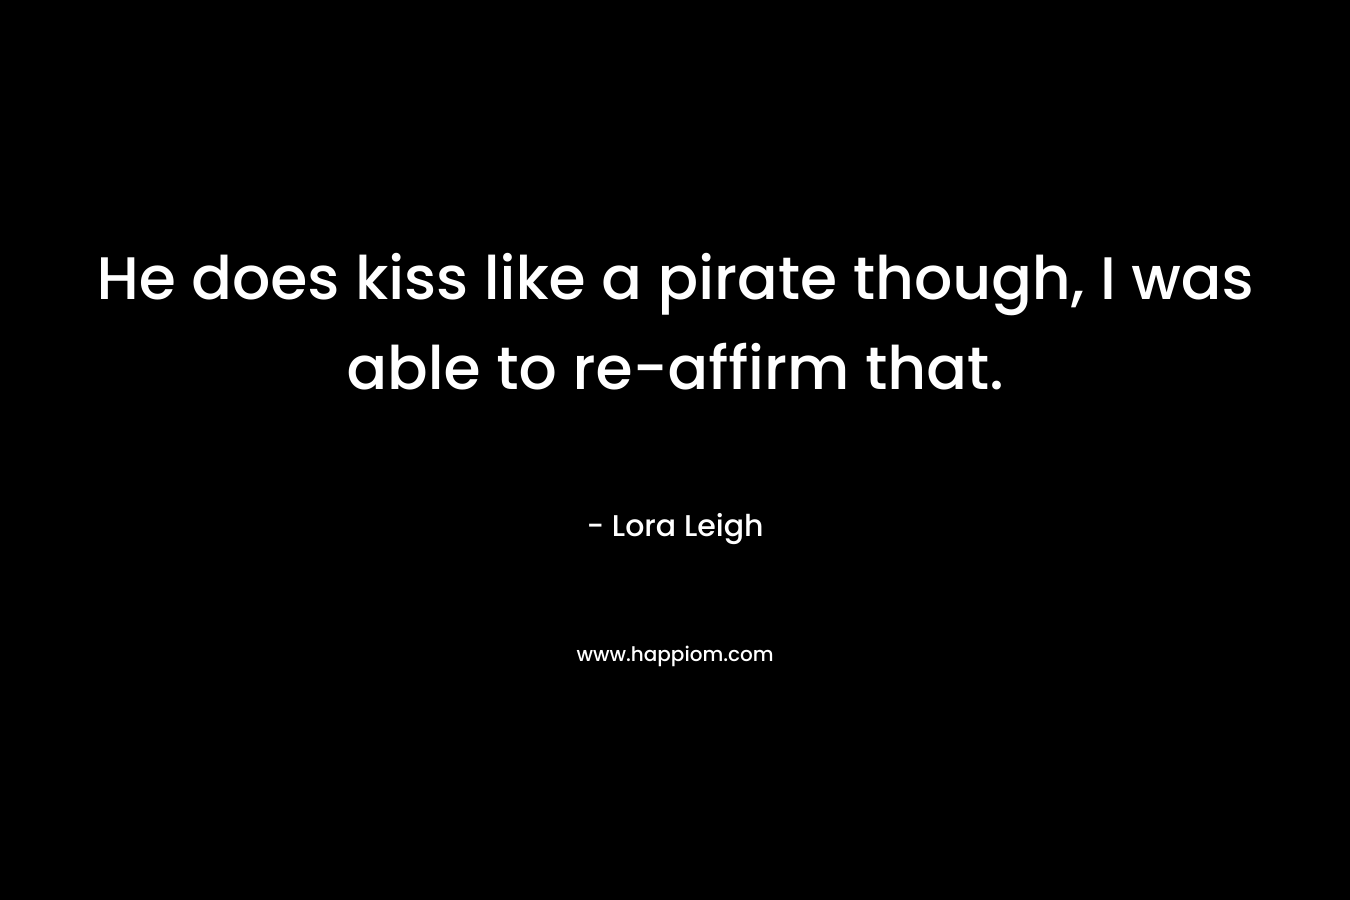 He does kiss like a pirate though, I was able to re-affirm that.